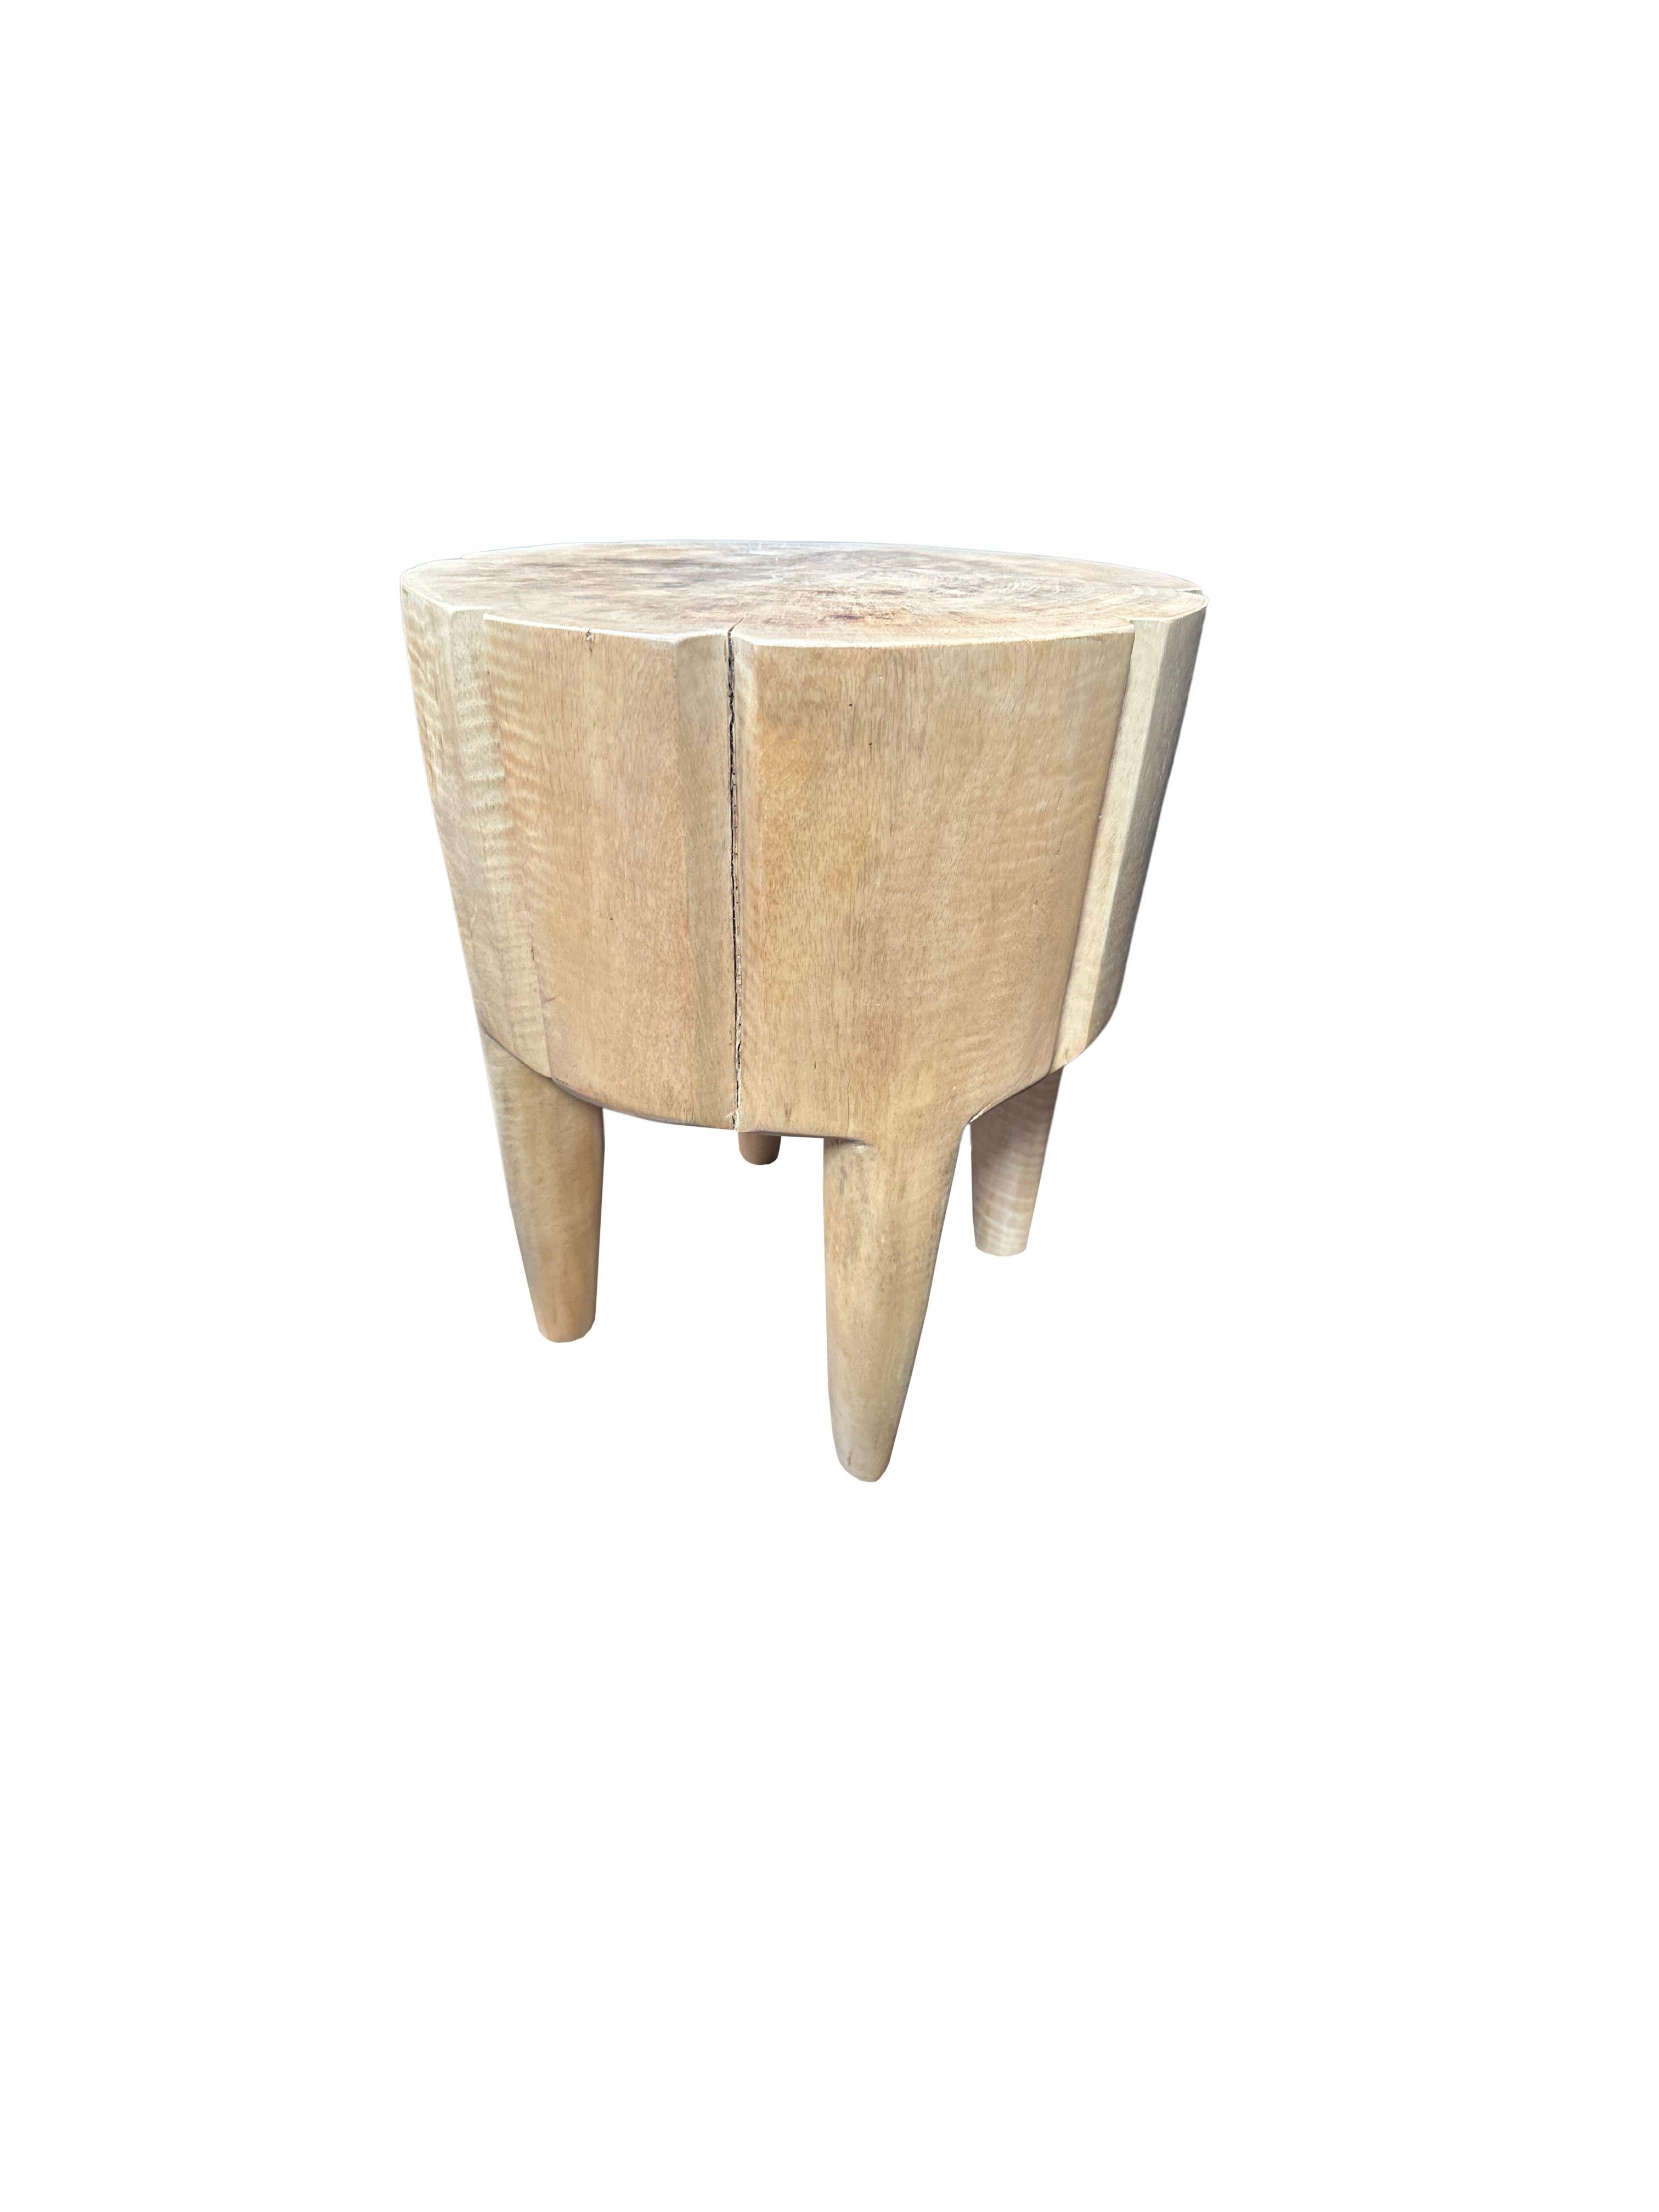 Indonesian Sculptural Side Table Mango Wood Natural Finish For Sale